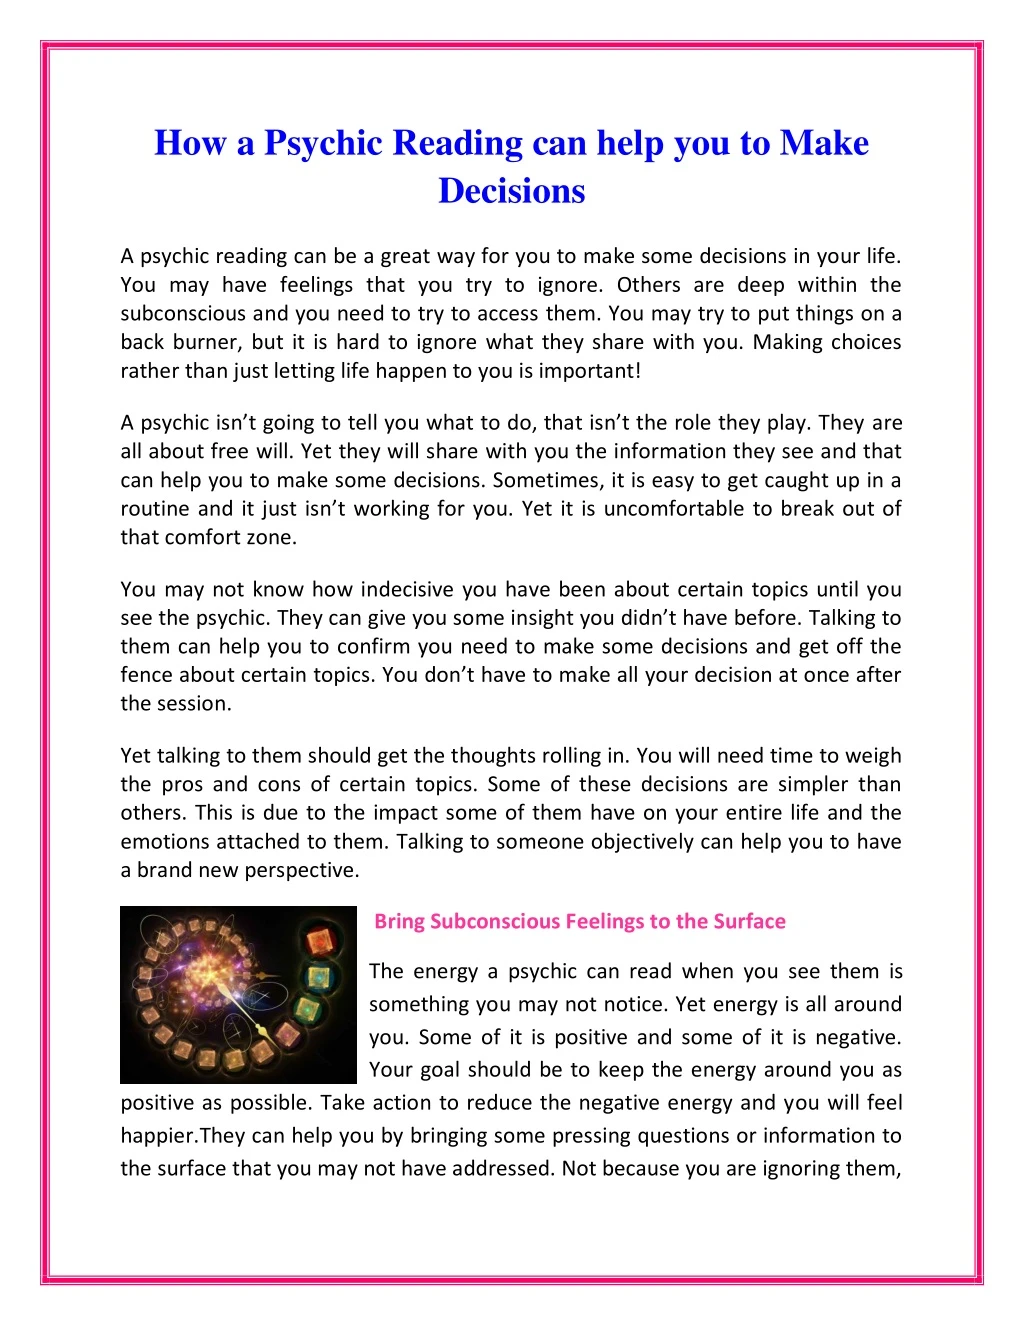 how a psychic reading can help you to make